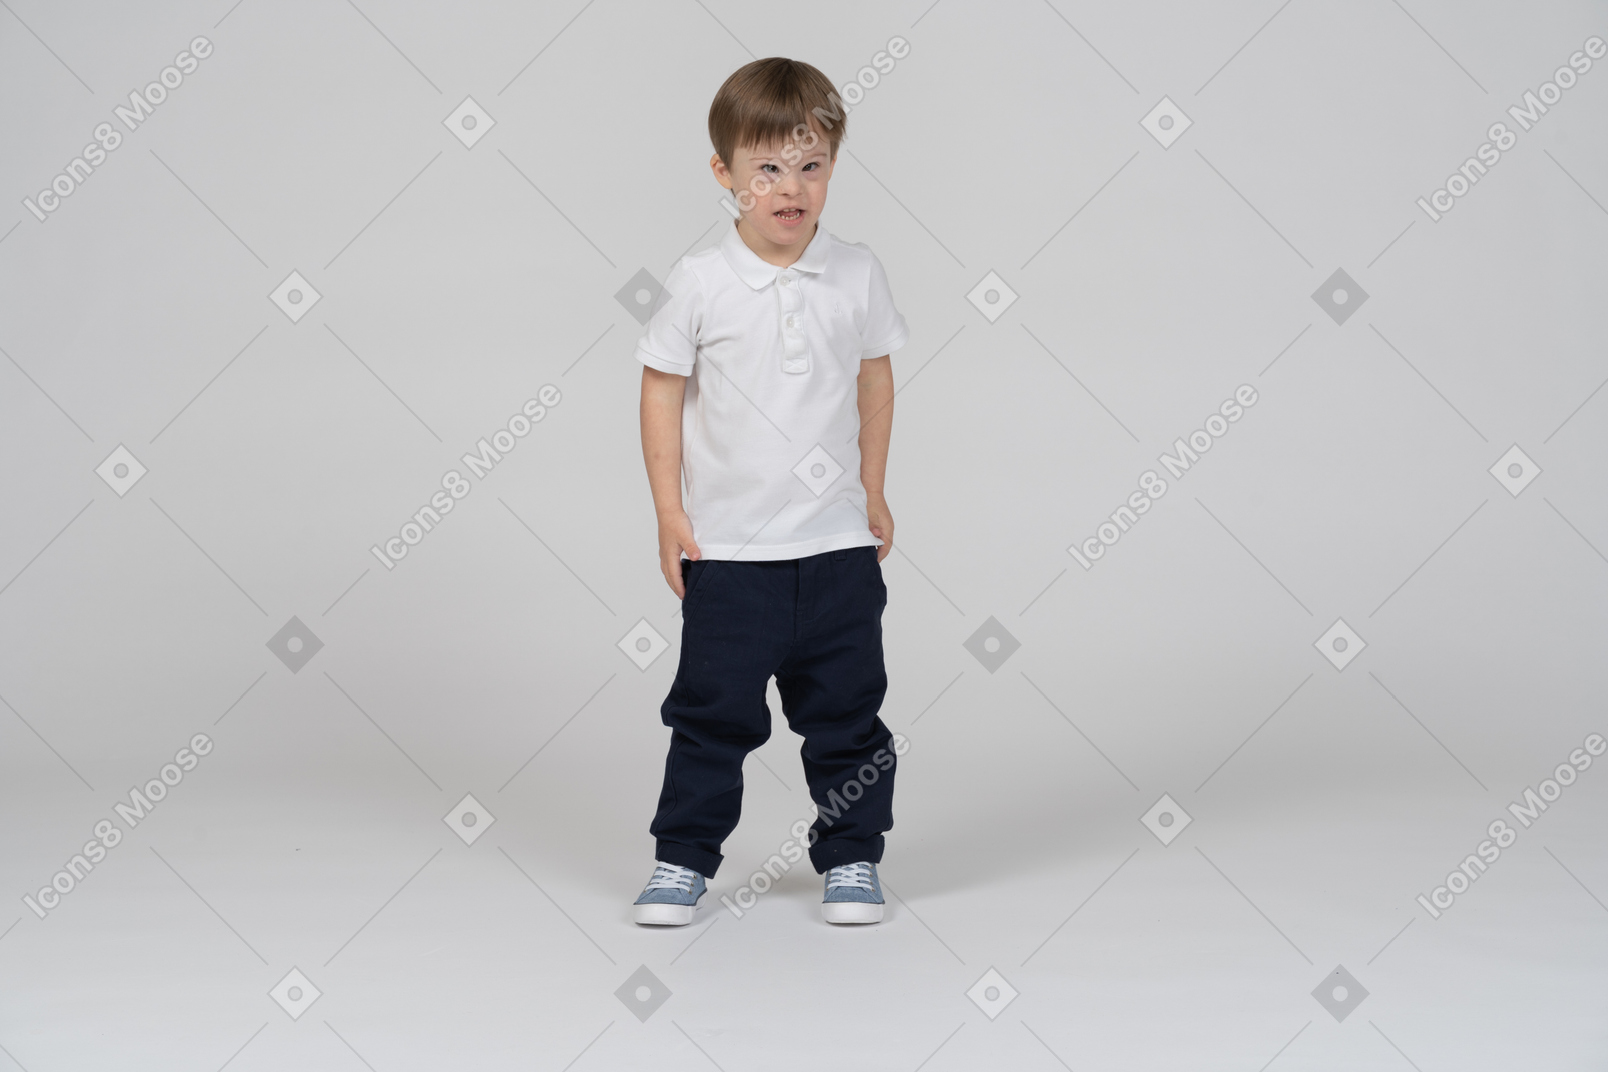 Front view of a boy standing and slightly squinting